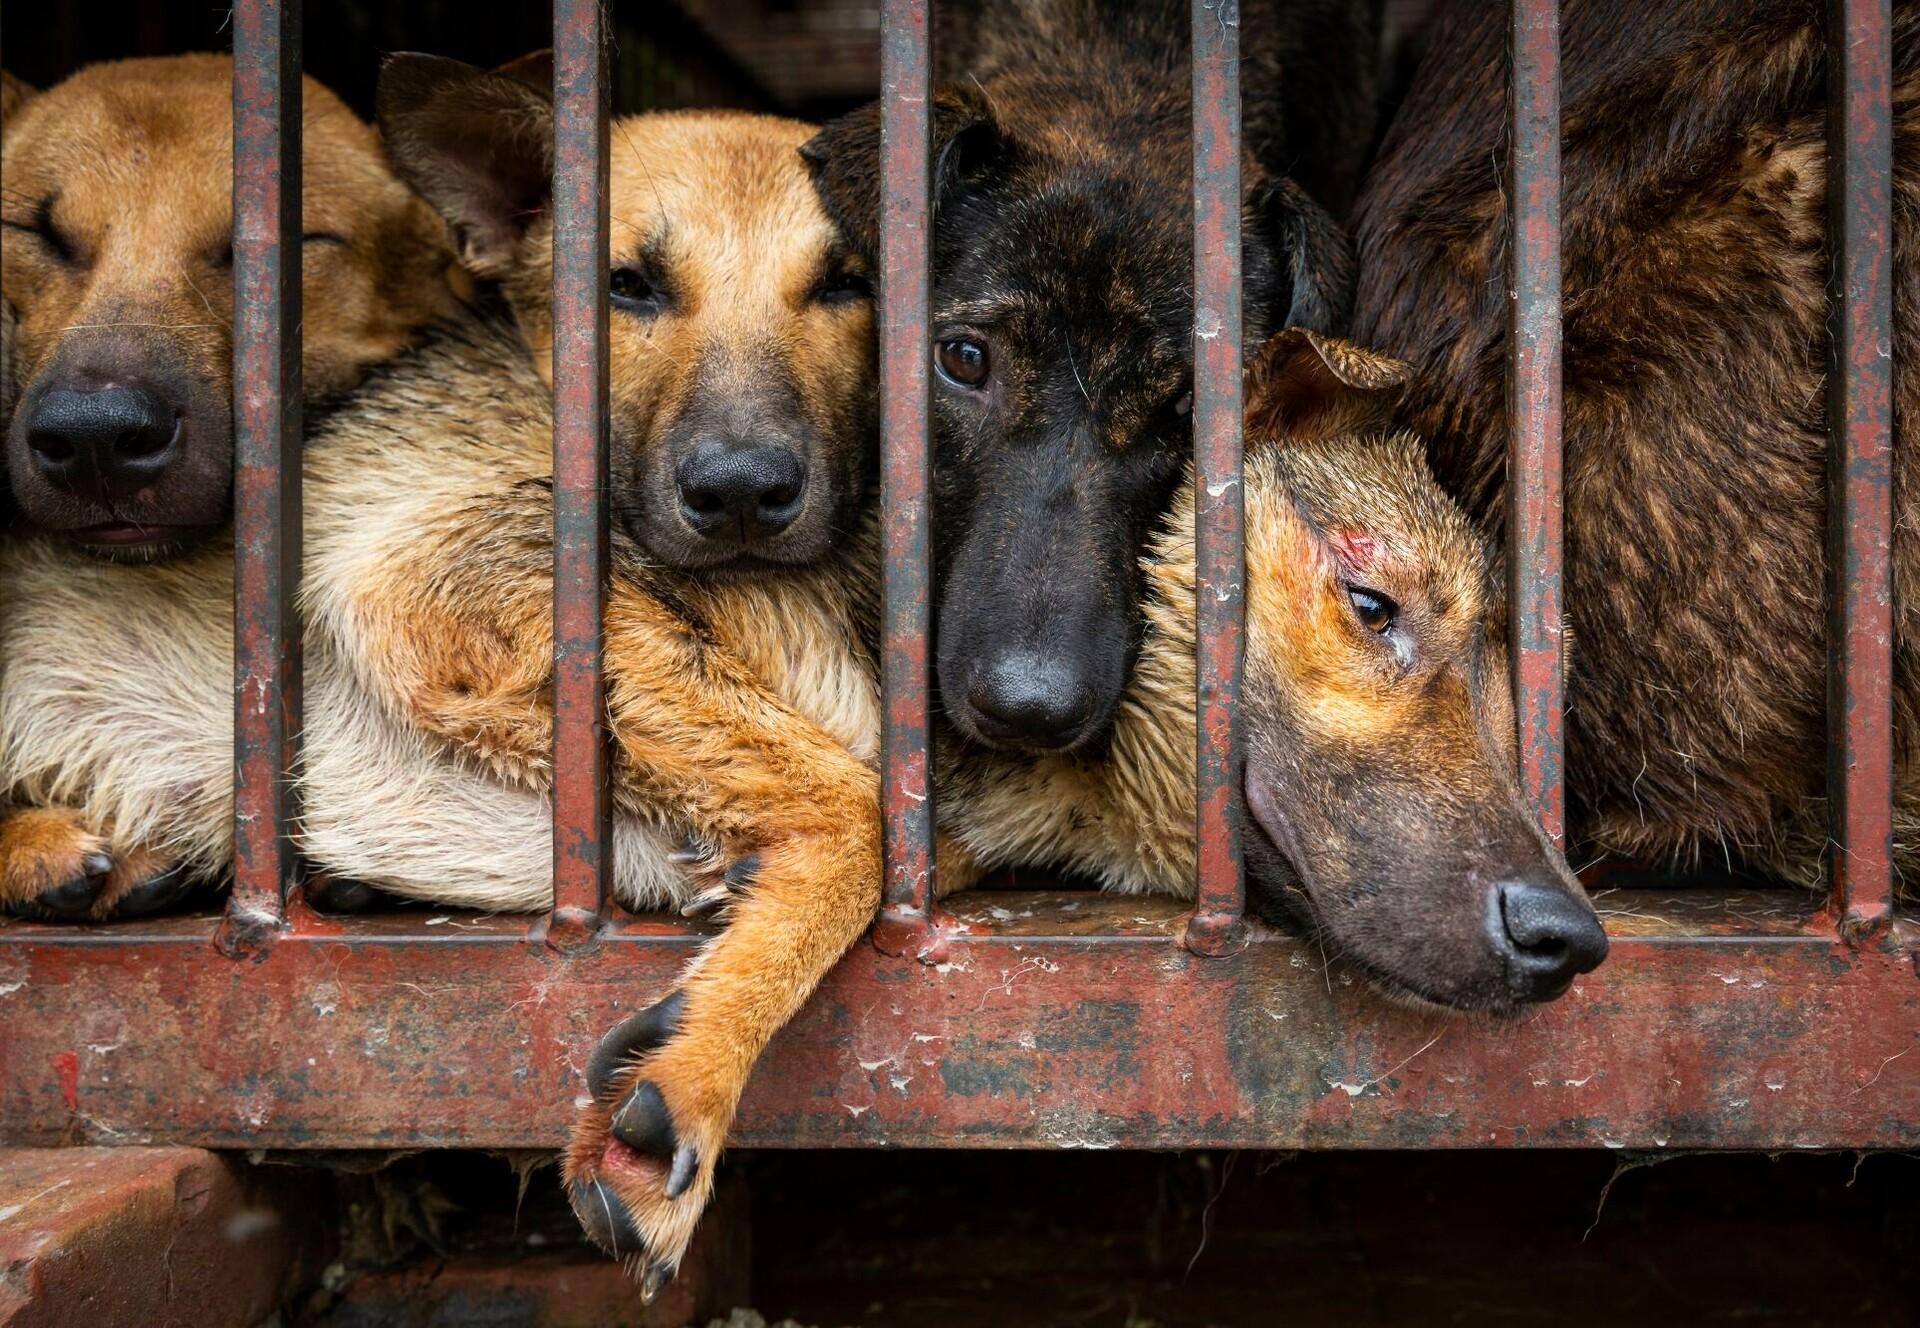 Dog and cat meat consumption ban in UK - Blog & News - Our Stories - FOUR PAWS in the UK